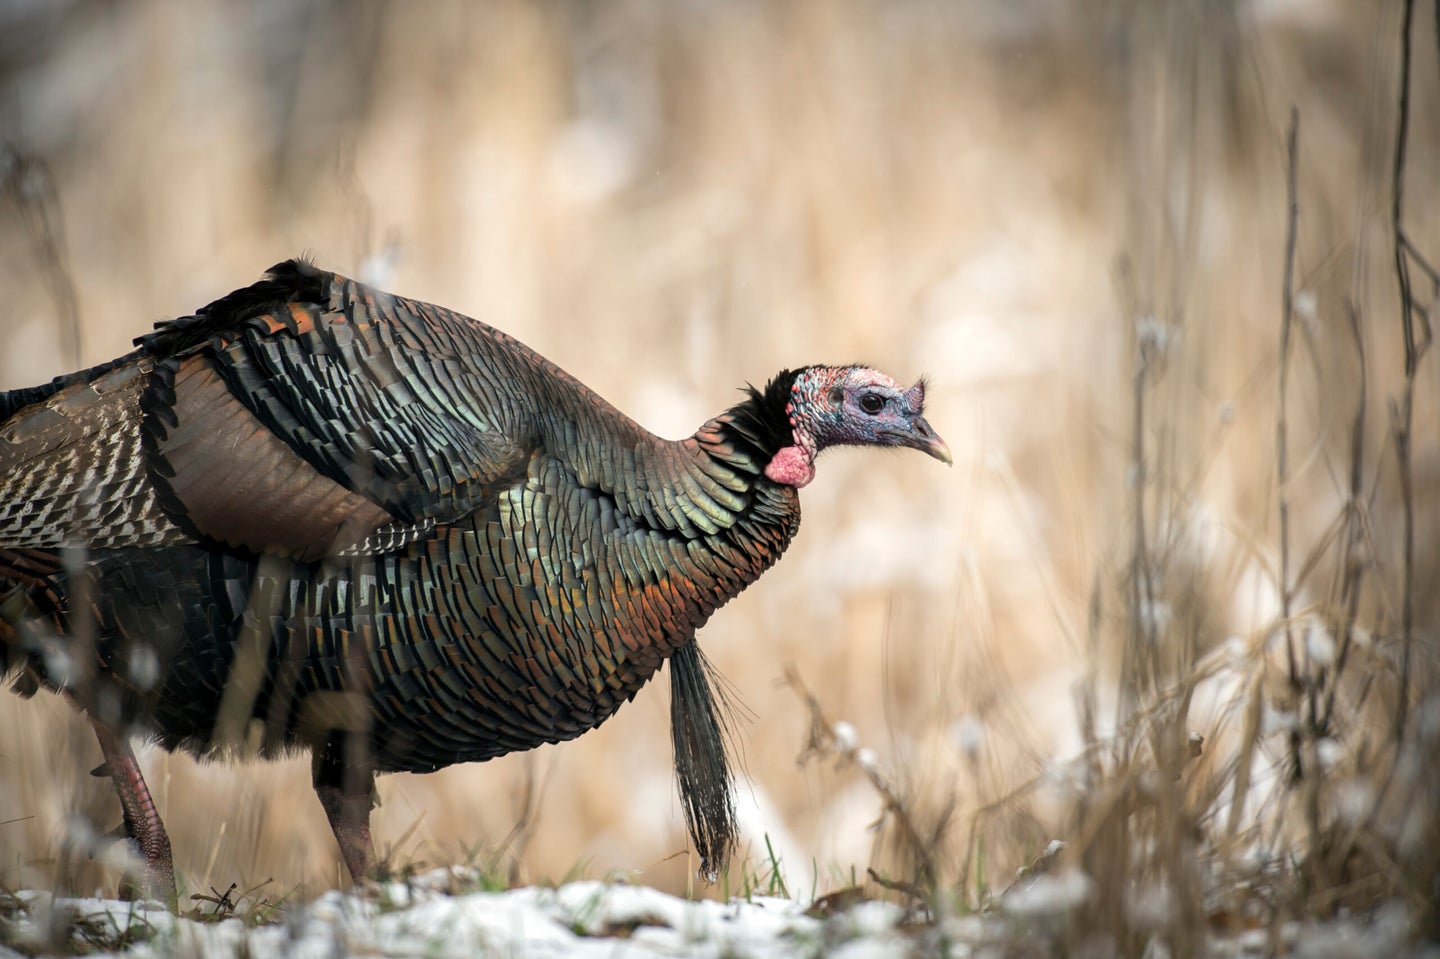 Wild turkey feeds in the early spring